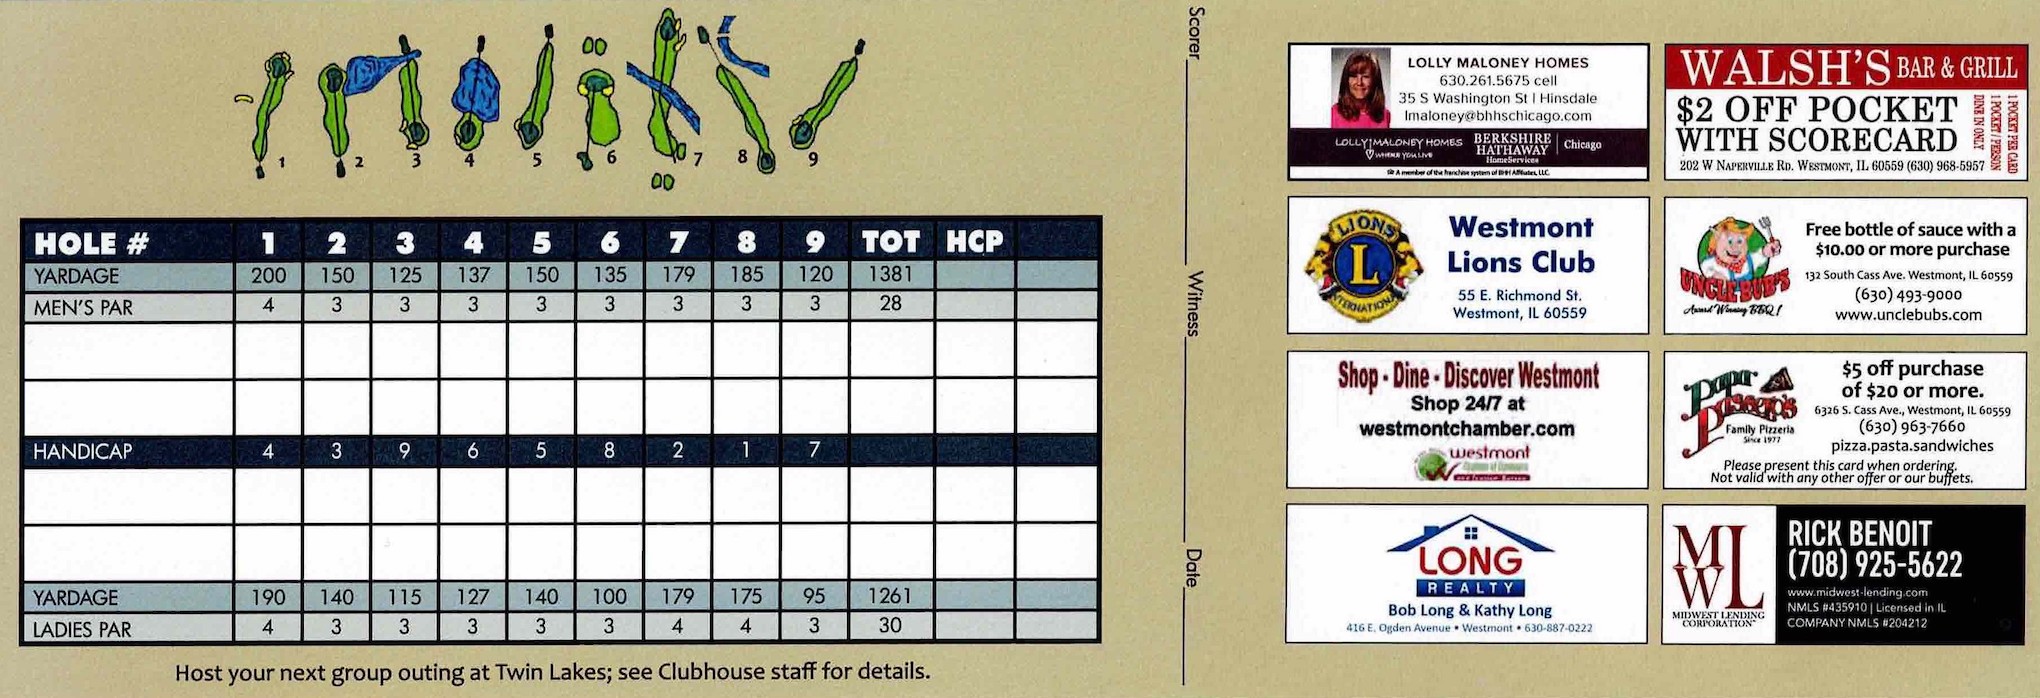 Scan of the scorecard from Twin Lakes Golf Club in Westmont, Illinois. 